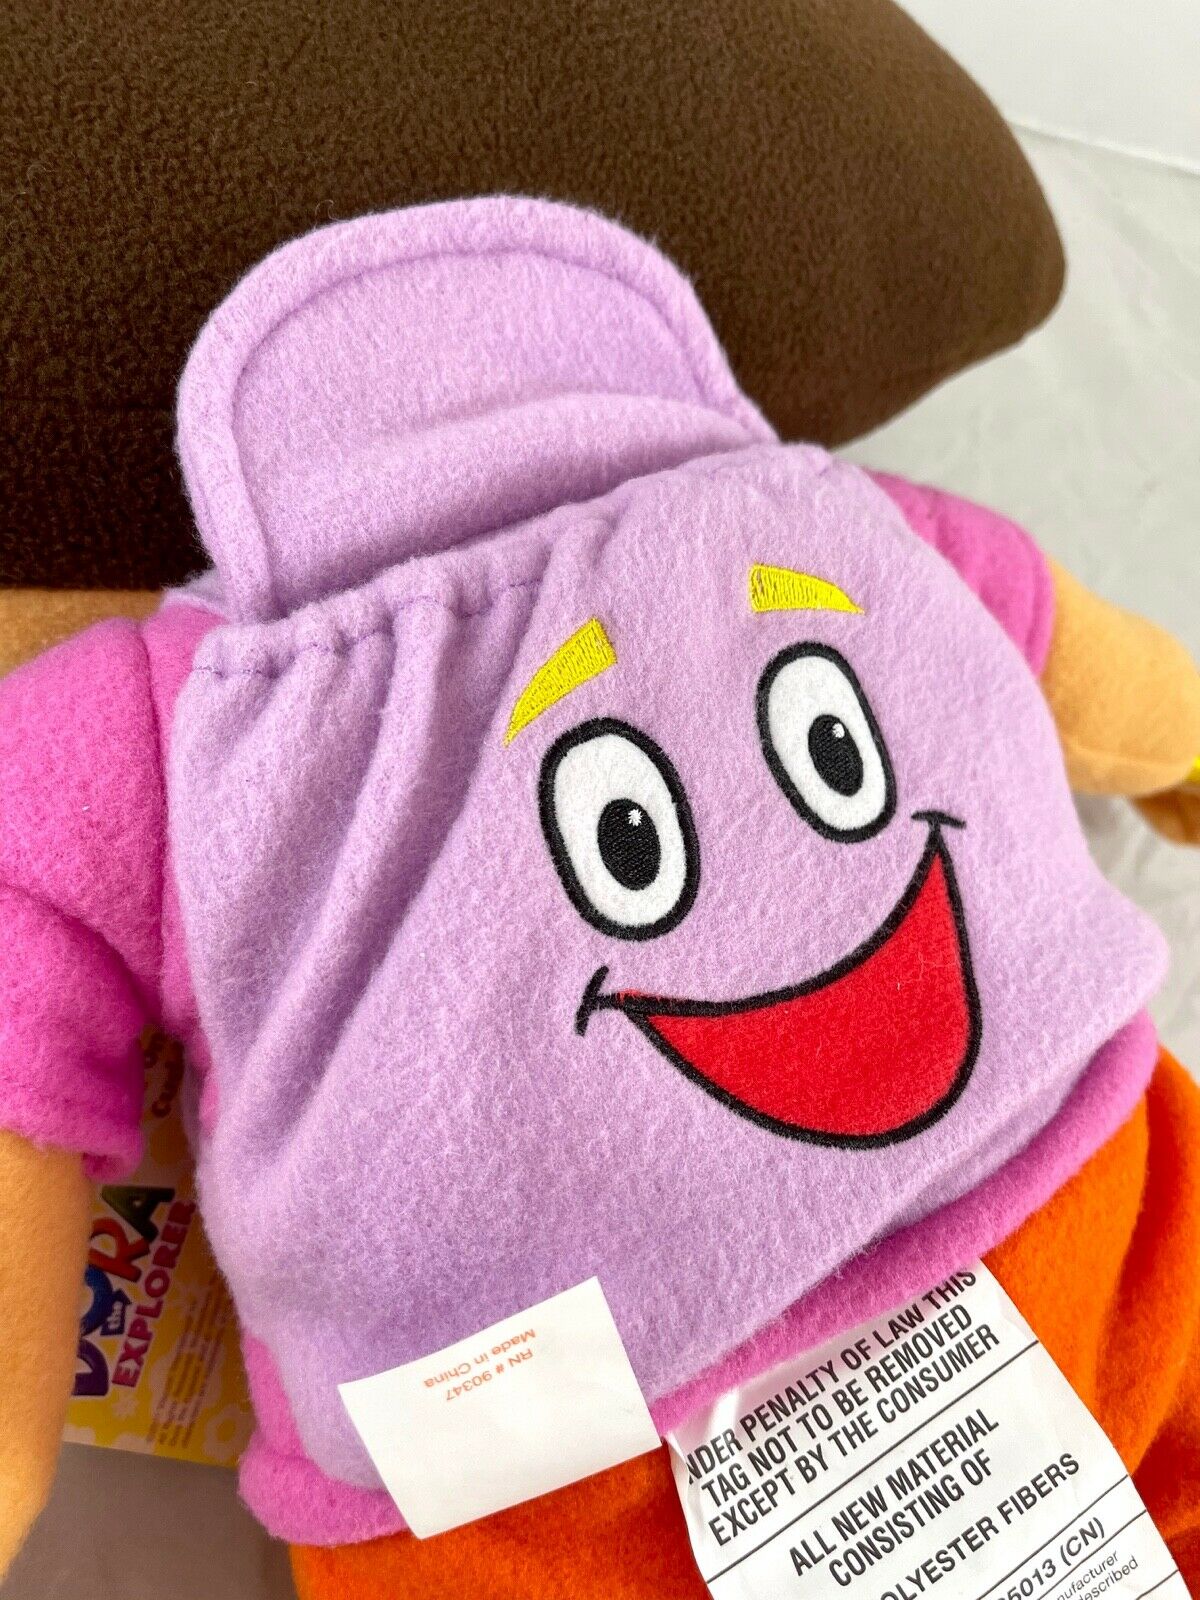 Nickelodeon Dora the Explore Backpack Soft Plush Doll Toy